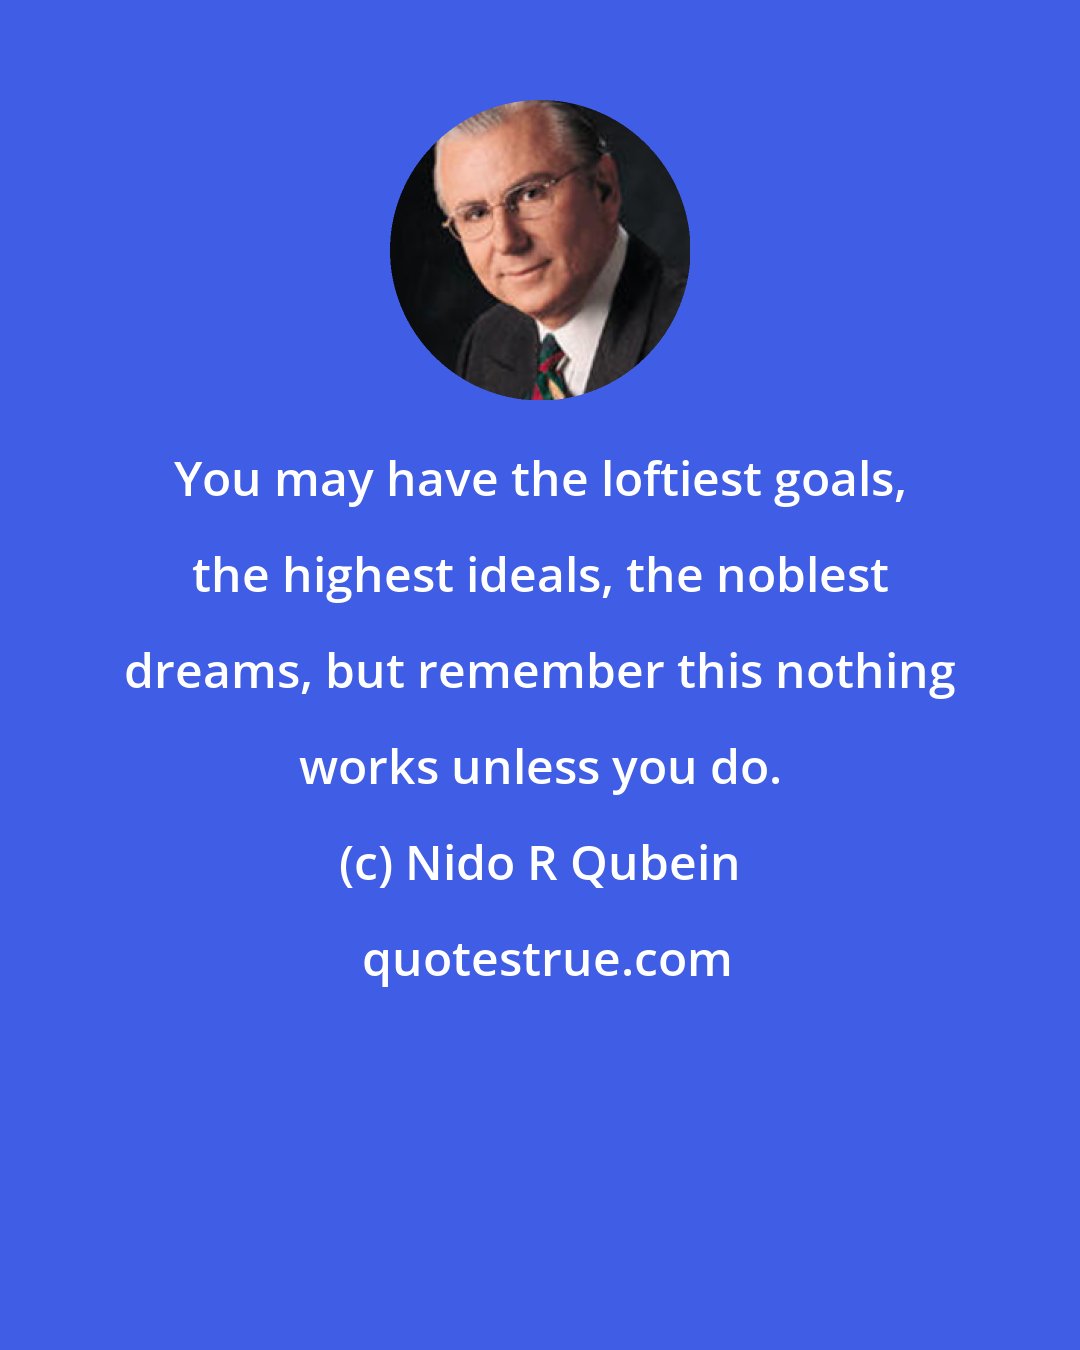 Nido R Qubein: You may have the loftiest goals, the highest ideals, the noblest dreams, but remember this nothing works unless you do.